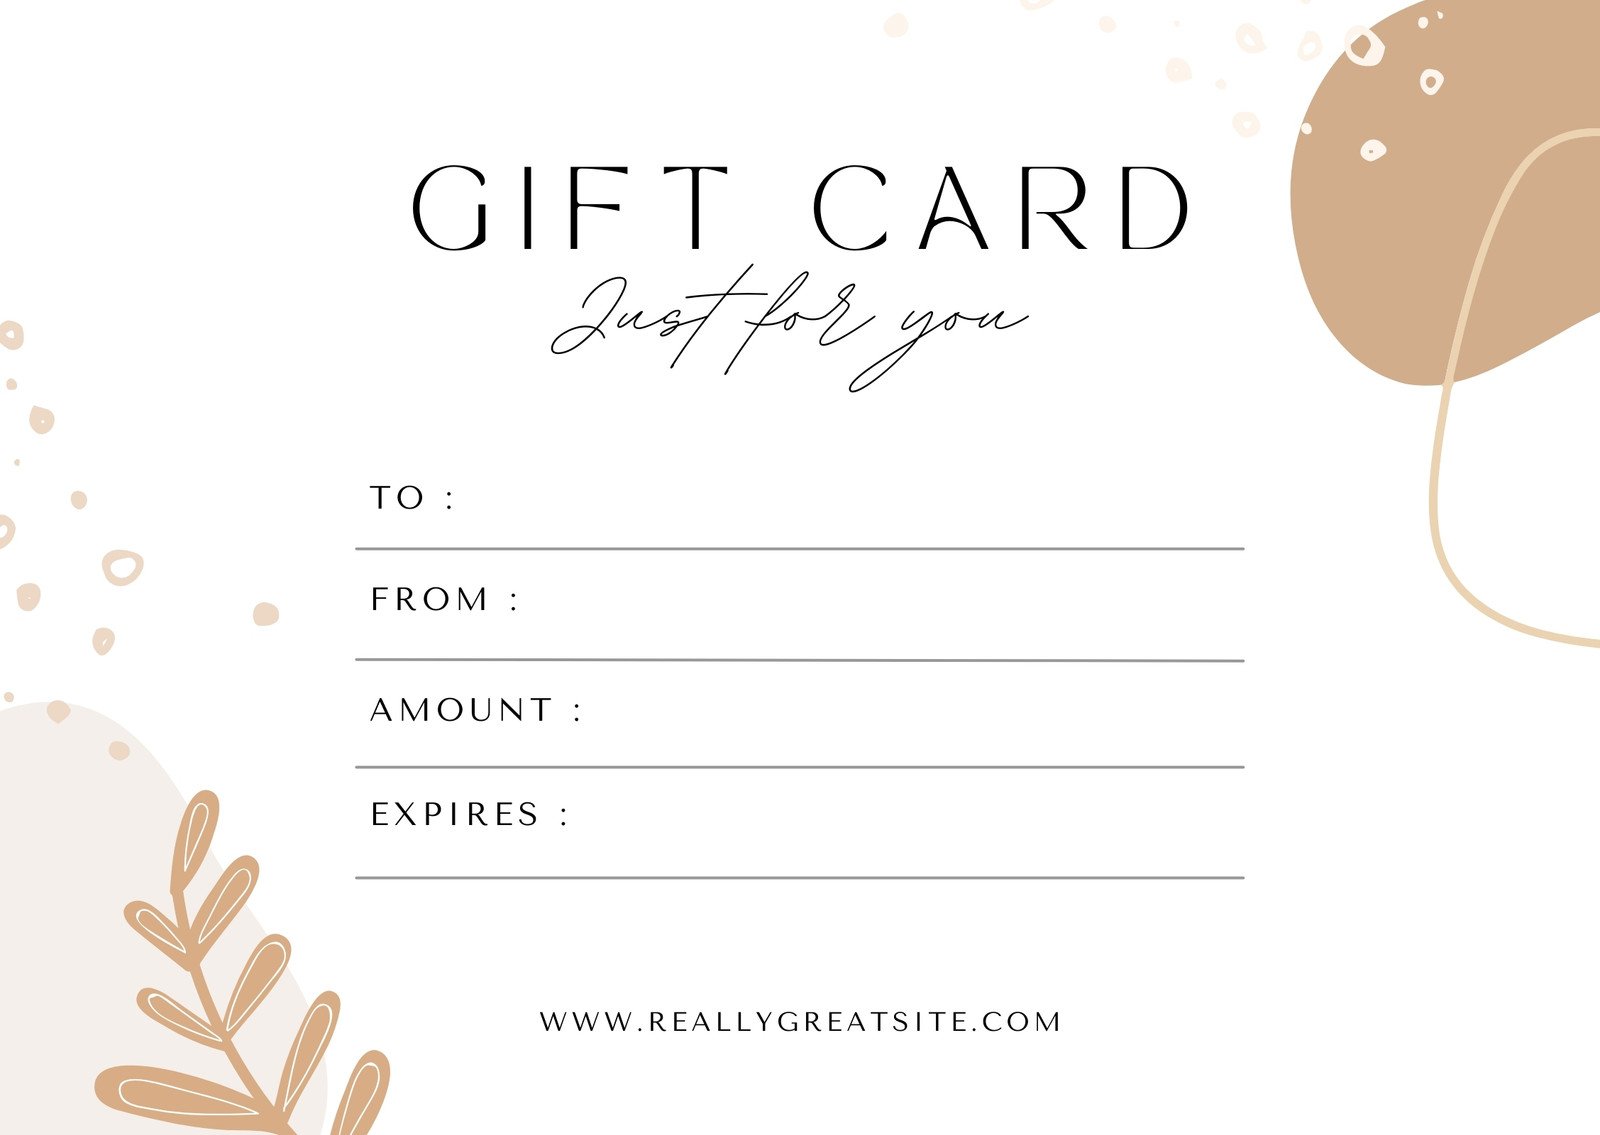 Gift Cards Gift Vouchers and Packages WooCommerce Supported  WordPress  plugin  WordPressorg